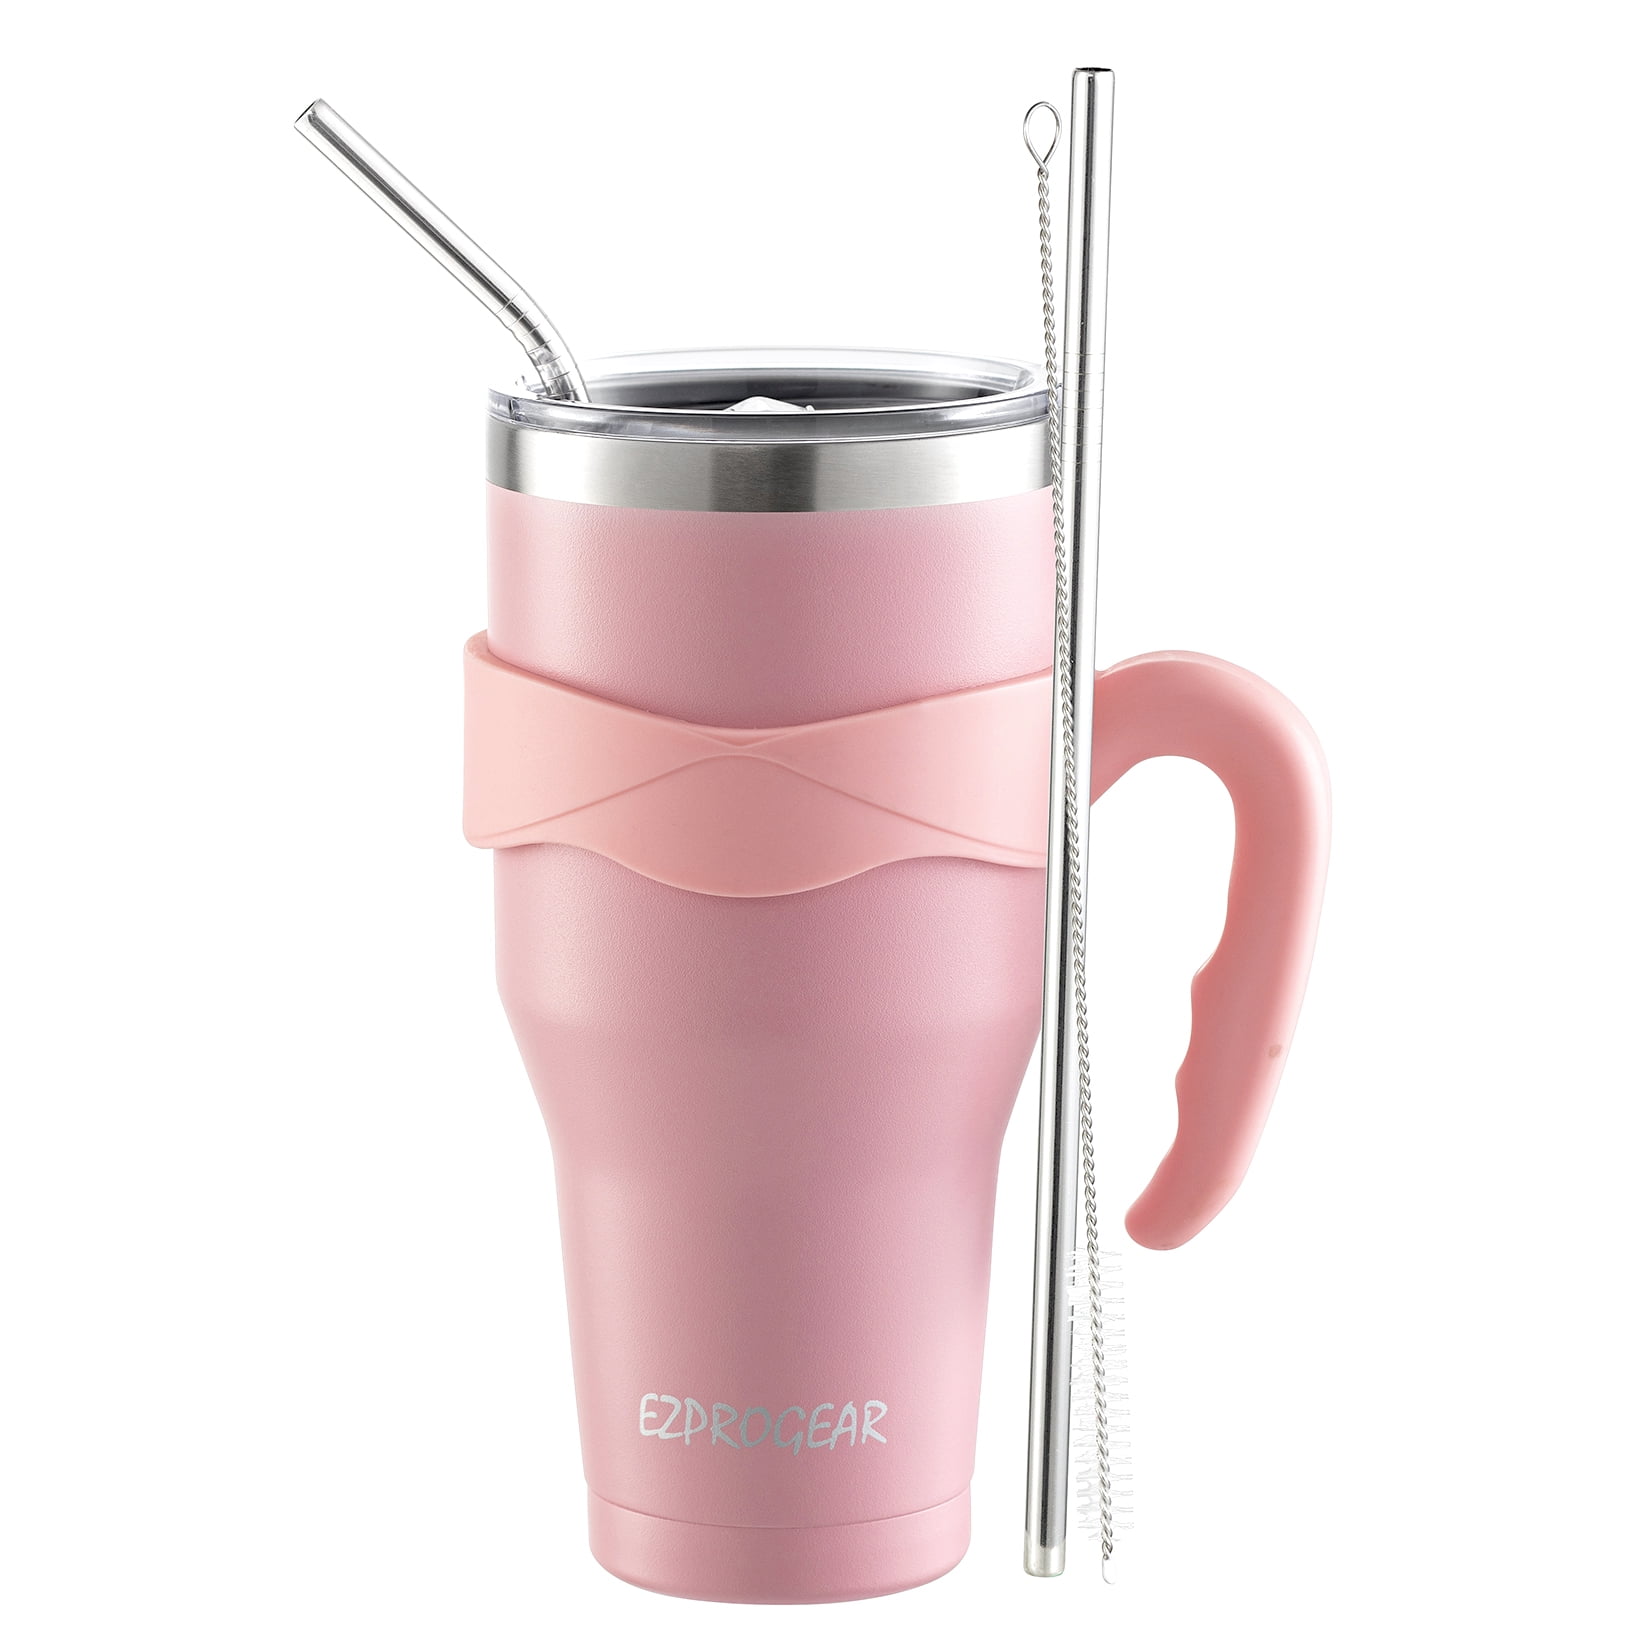 Sivio 40 oz Tumbler With Handle and Straw Lid Stainless Steel Insulated  Tumblers Travel Mug for Hot and Cold Beverages,Pink